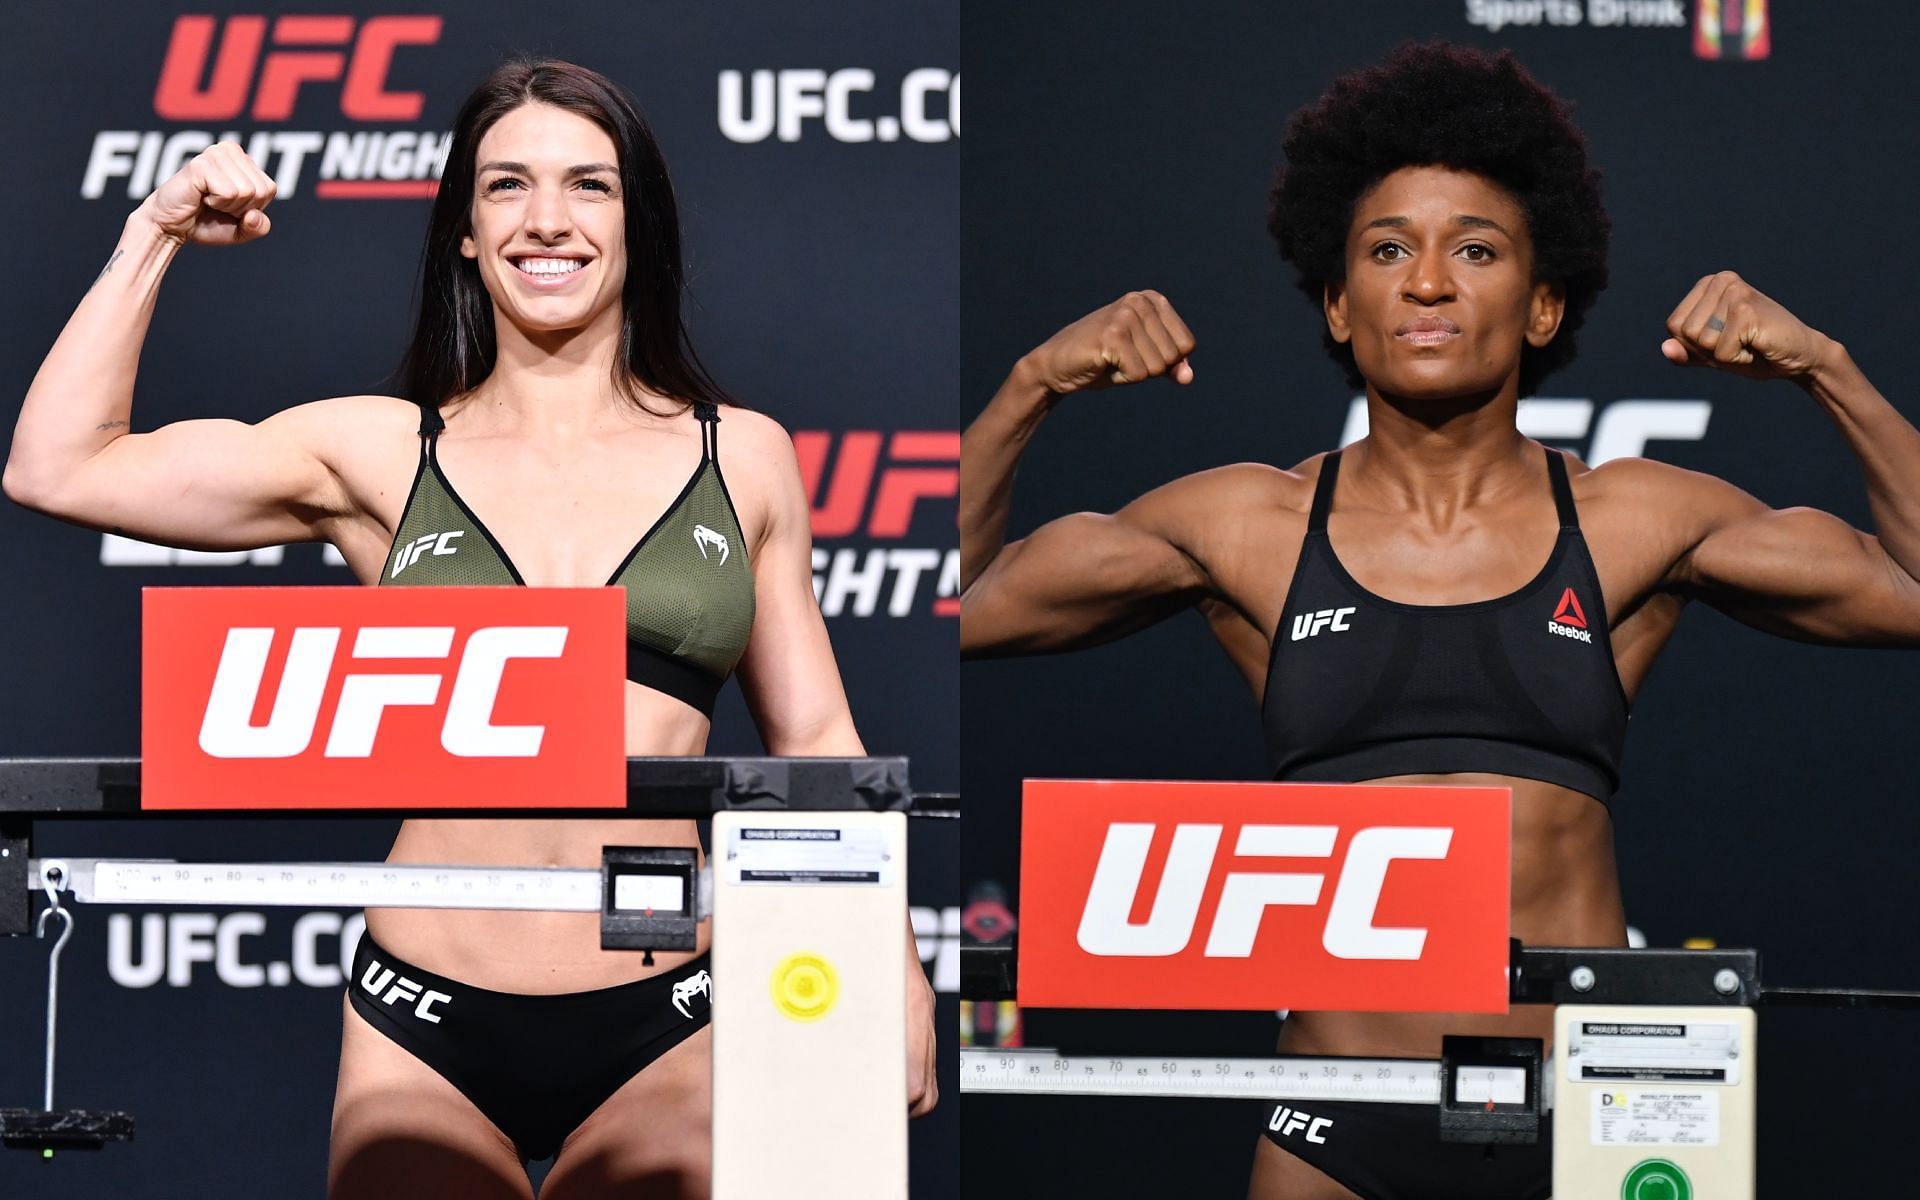 Mackenzie Dern (left) and Angela Hill (right) [Image credits: Getty Images]